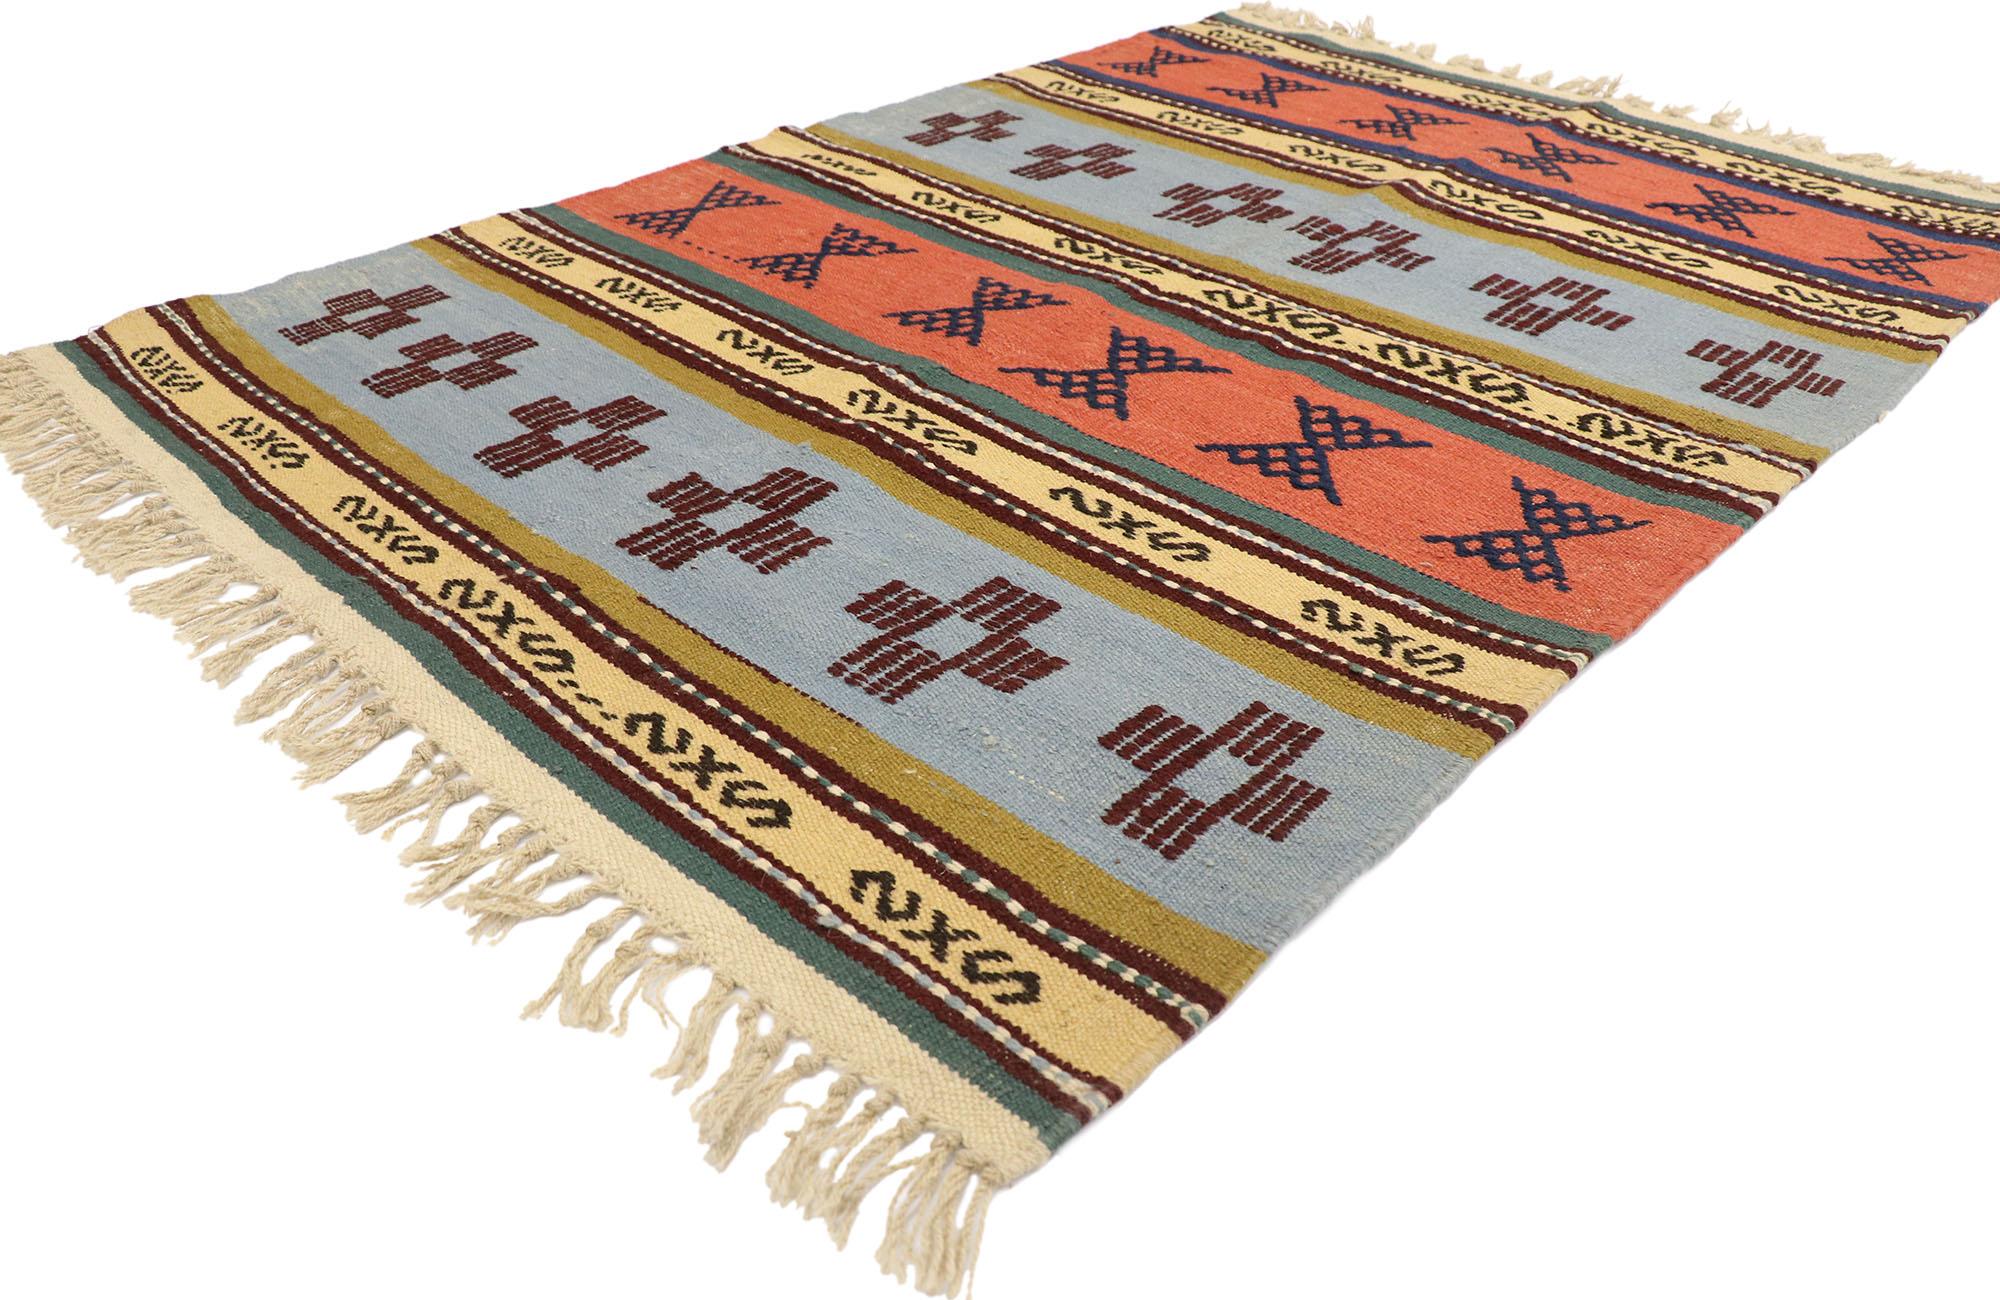 77944 vintage Persian Kilim rug with Modern Tribal style 03'10 x 05'07. Full of tiny details and an expressive design, this hand-woven wool vintage Persian kilim rug is a captivating vision of woven beauty. The abrashed field features wide and